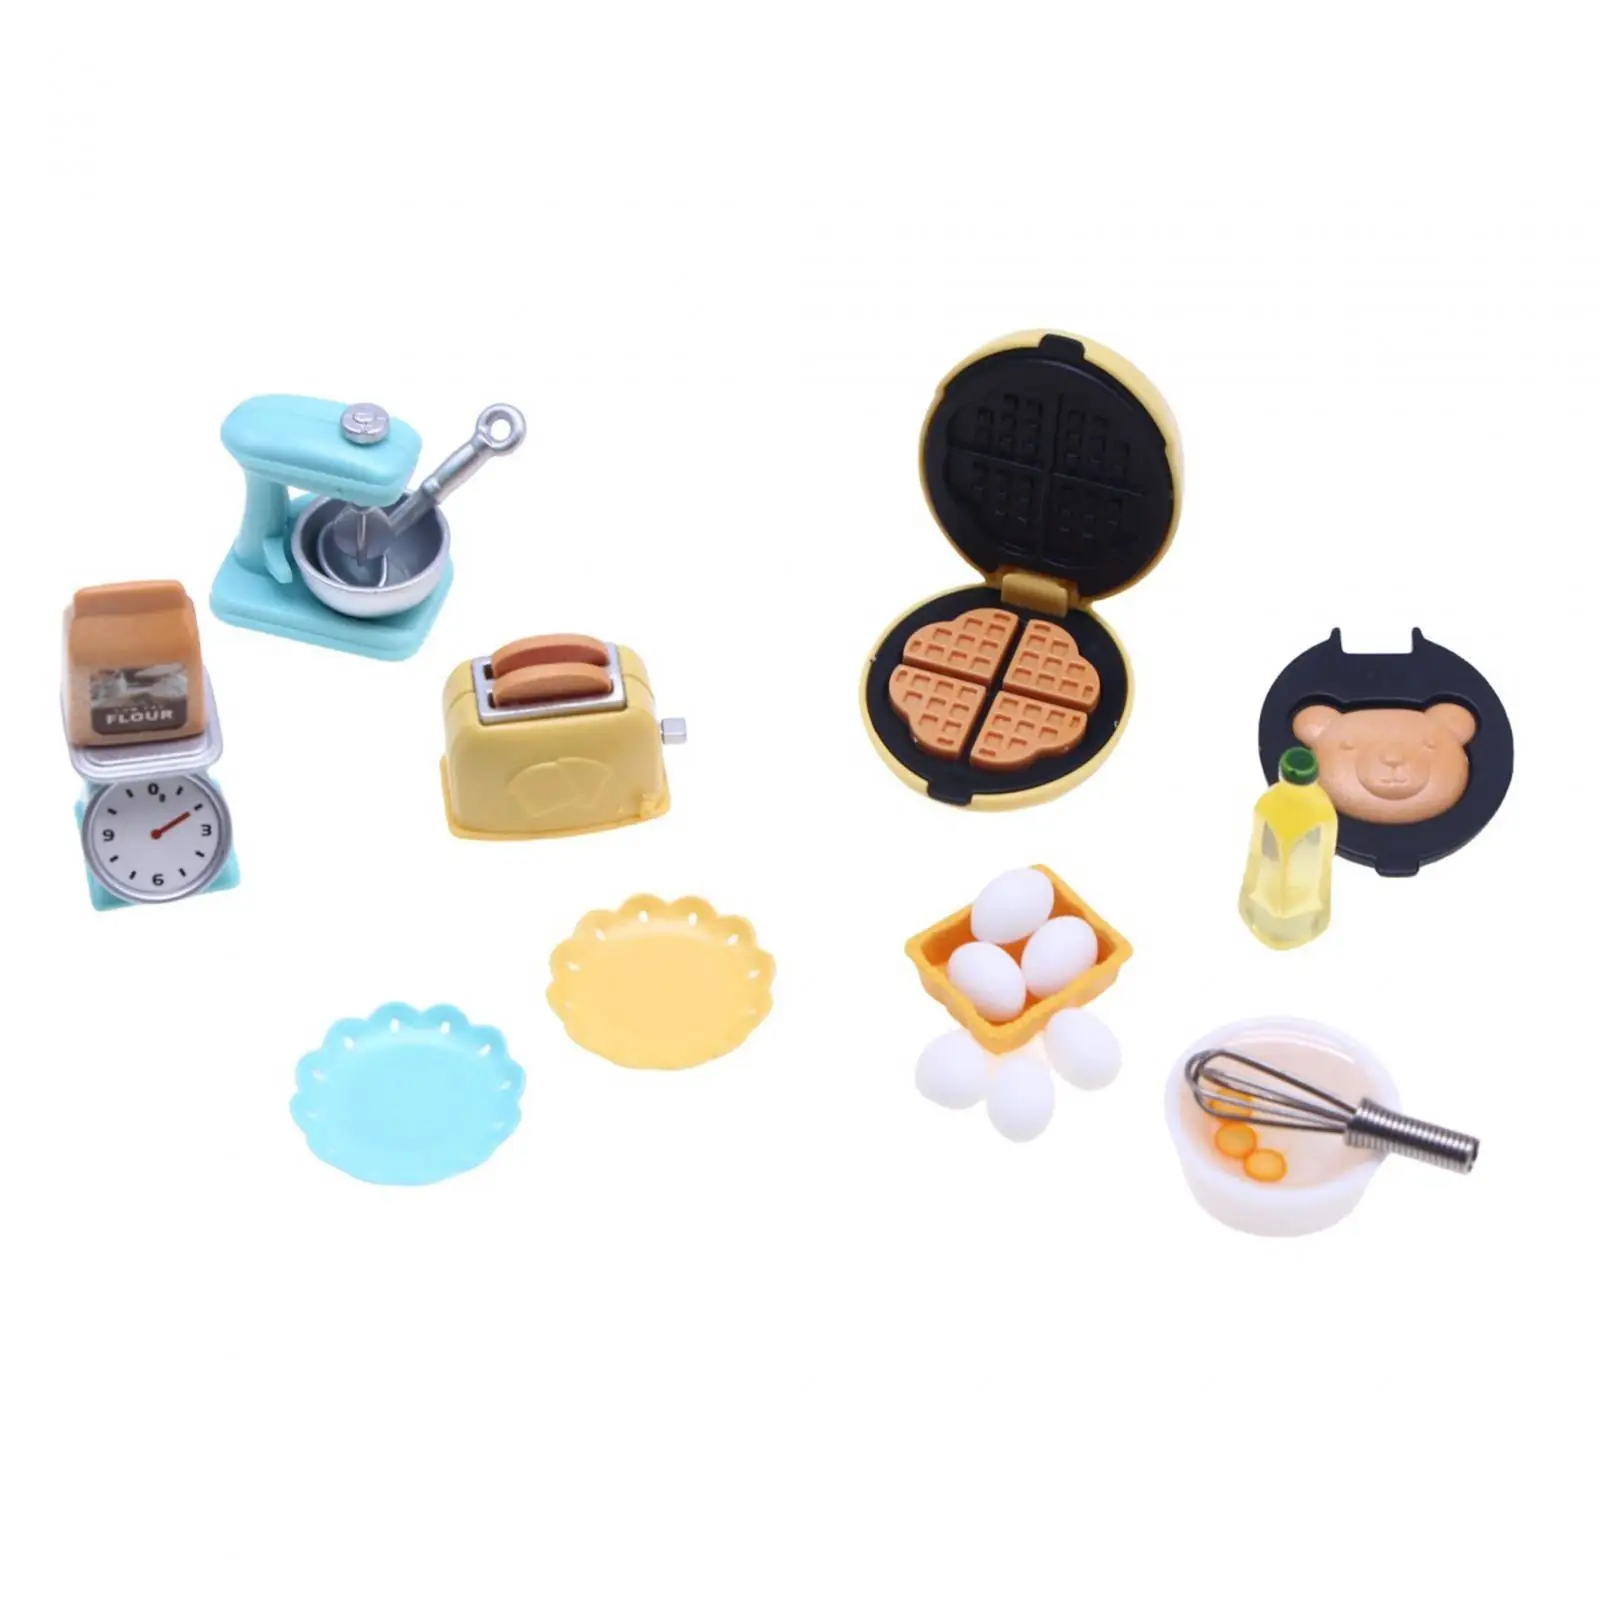 1:12 Dollhouse Kitchen Set Kitchen Appliances Toys Toasters Mini House Furniture Accessories Kits for Kids Girls Holiday Gifts